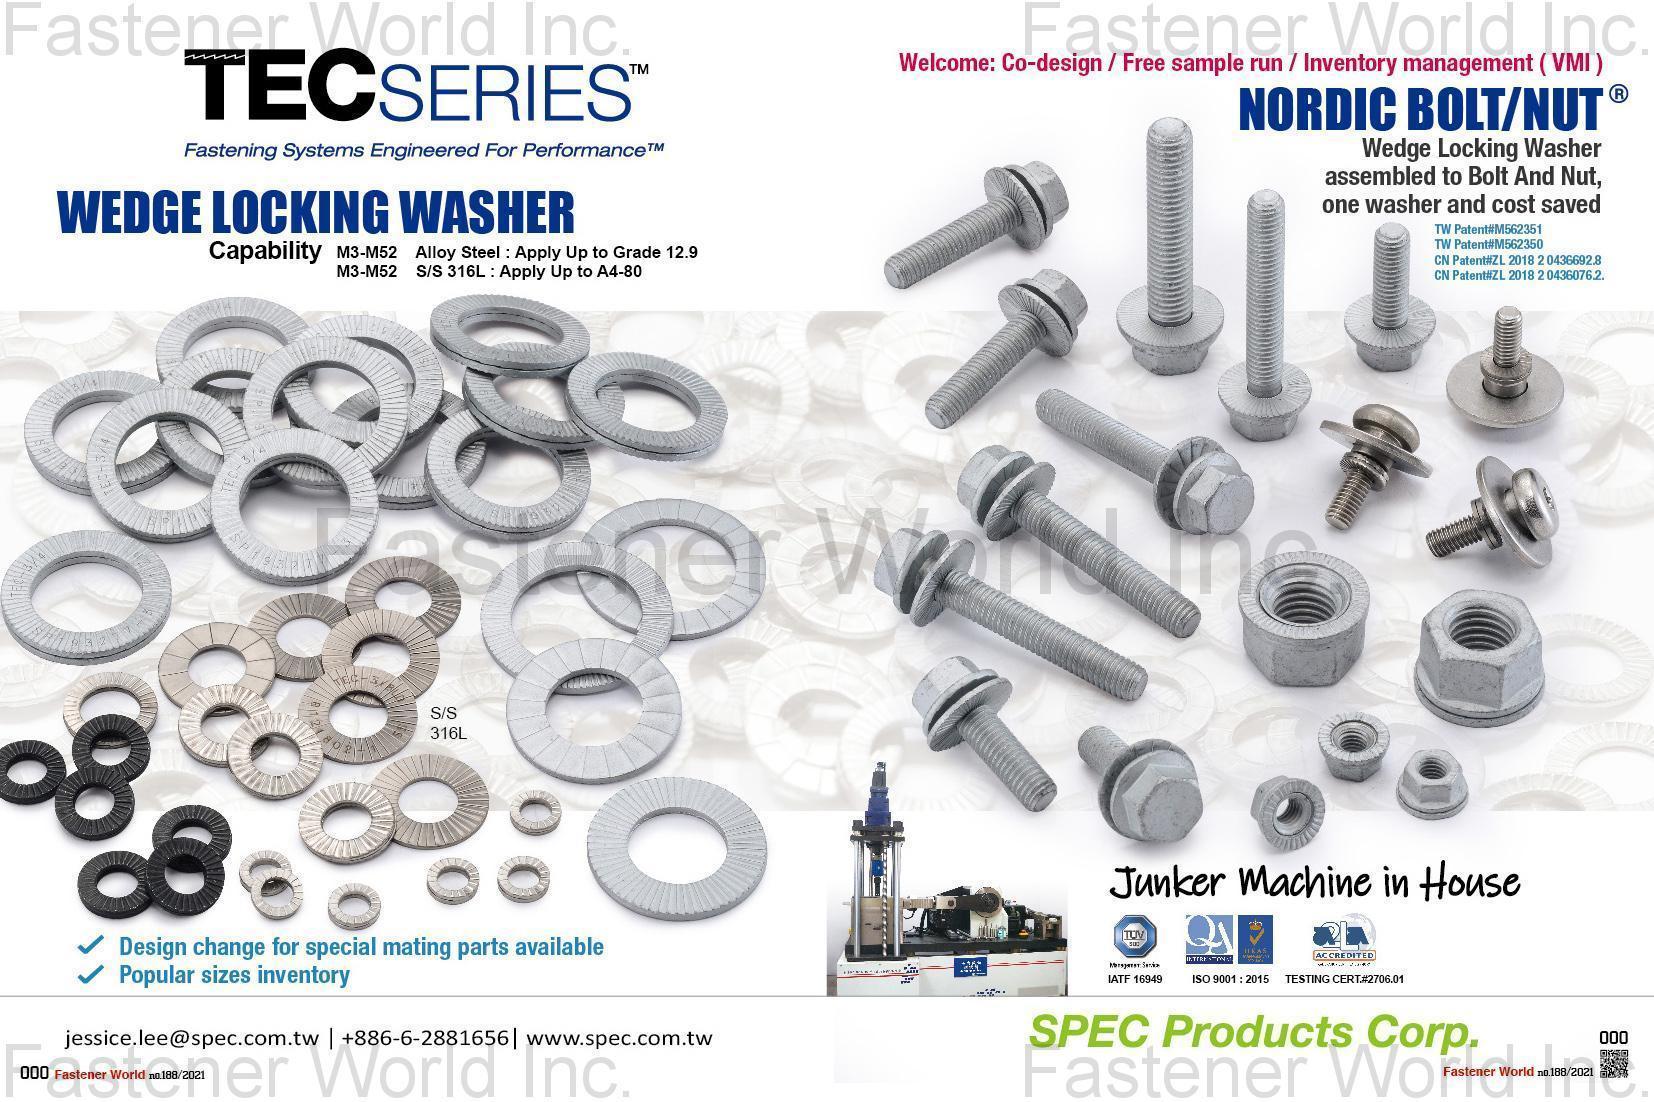 SPEC PRODUCTS CORP.  , Wedge Locking Washers, Nordic Bolt/Nut